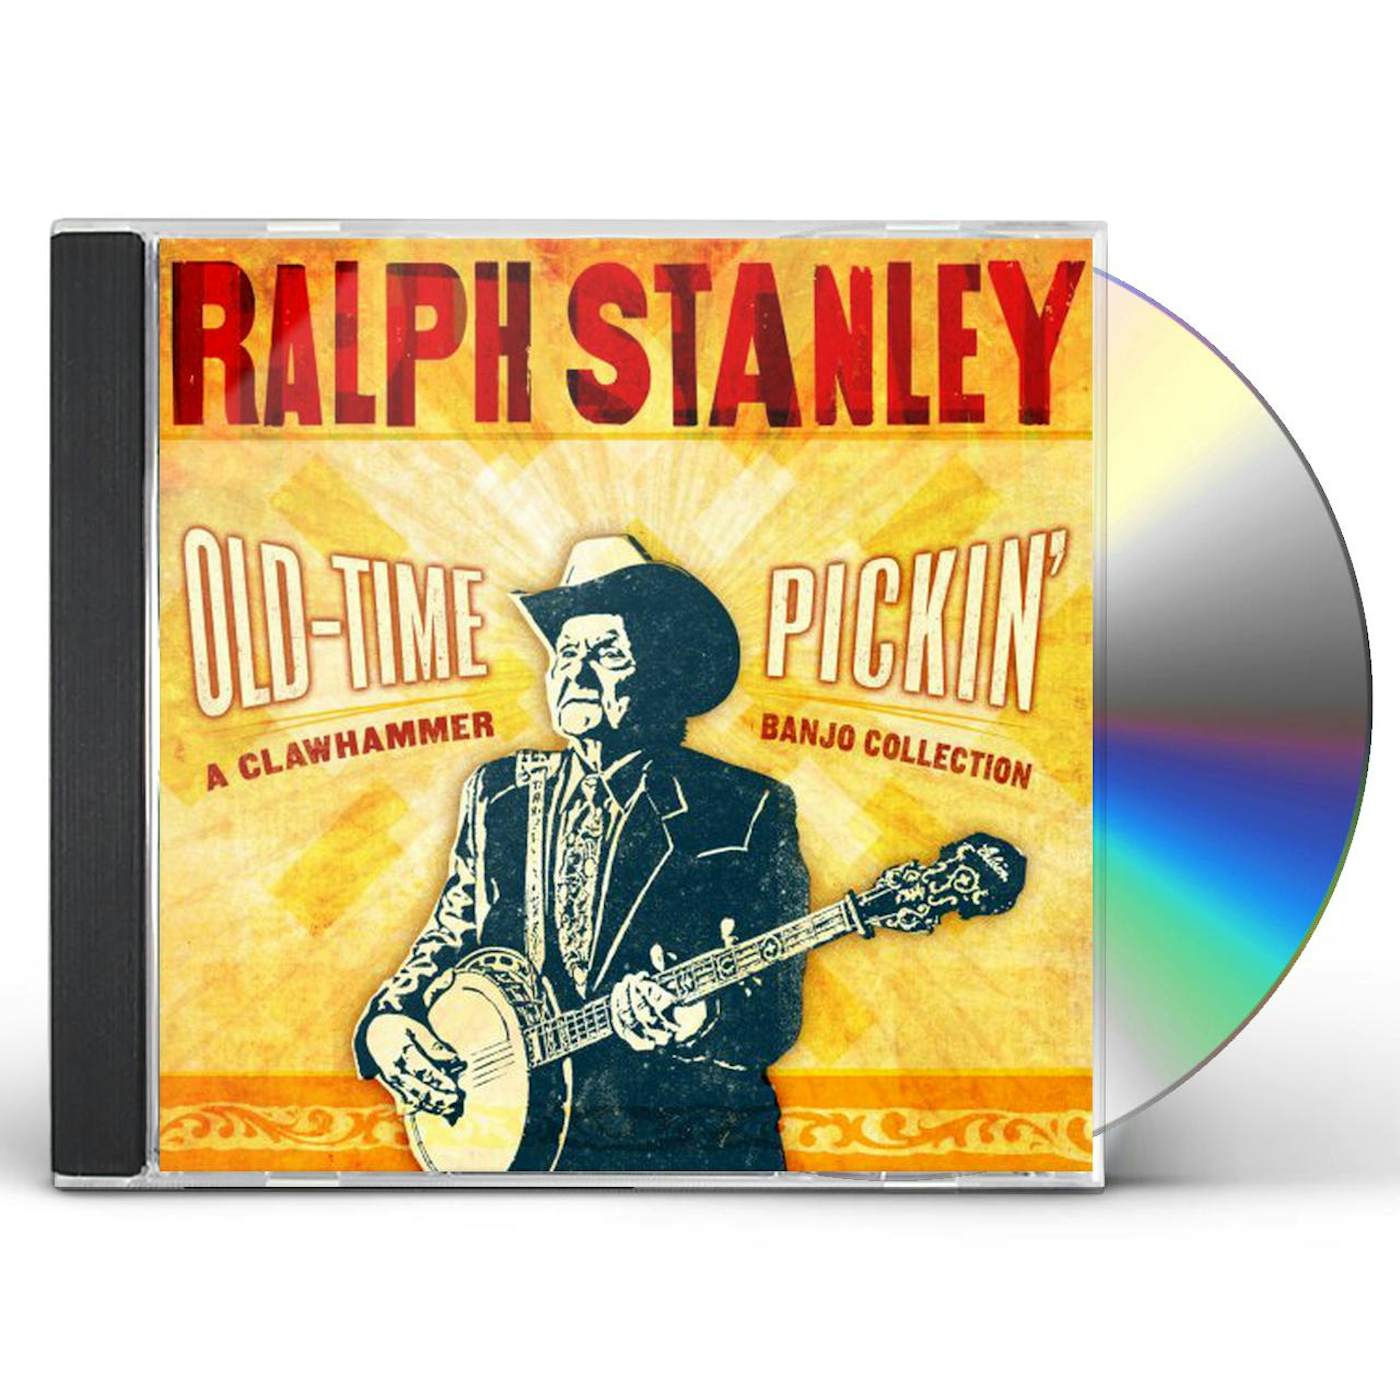 Ralph Stanley OLD-TIME PICKIN: CLAWHAMMER BANJO COLLECTION CD